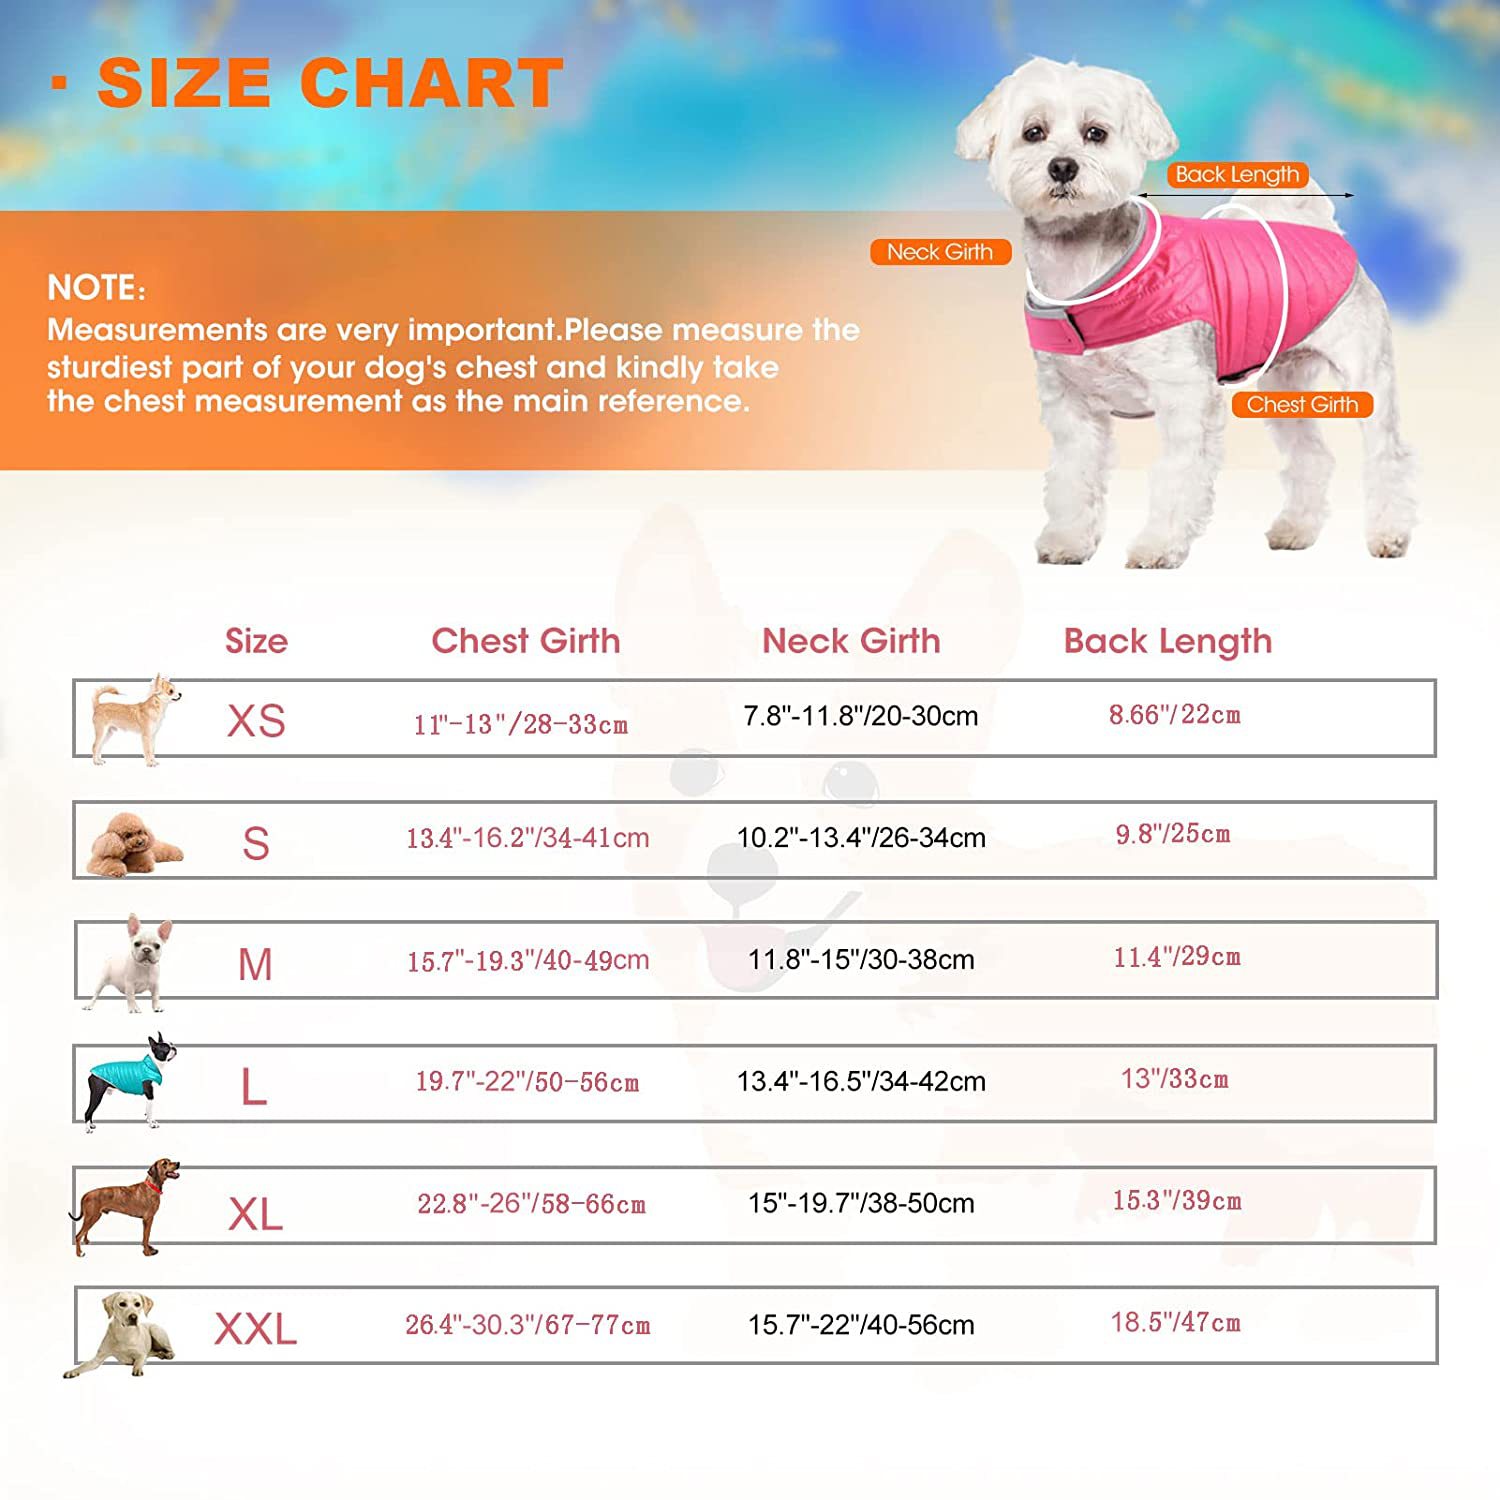 Dogcheer Dog Winter Coat Reversible, Lightweight Pet Jacket Warm Vest, Reflective Dog Clothes for Cold Weather, Waterproof Outdoor Puppy Puffer Jacket Apparel for Small Medium Large Dogs